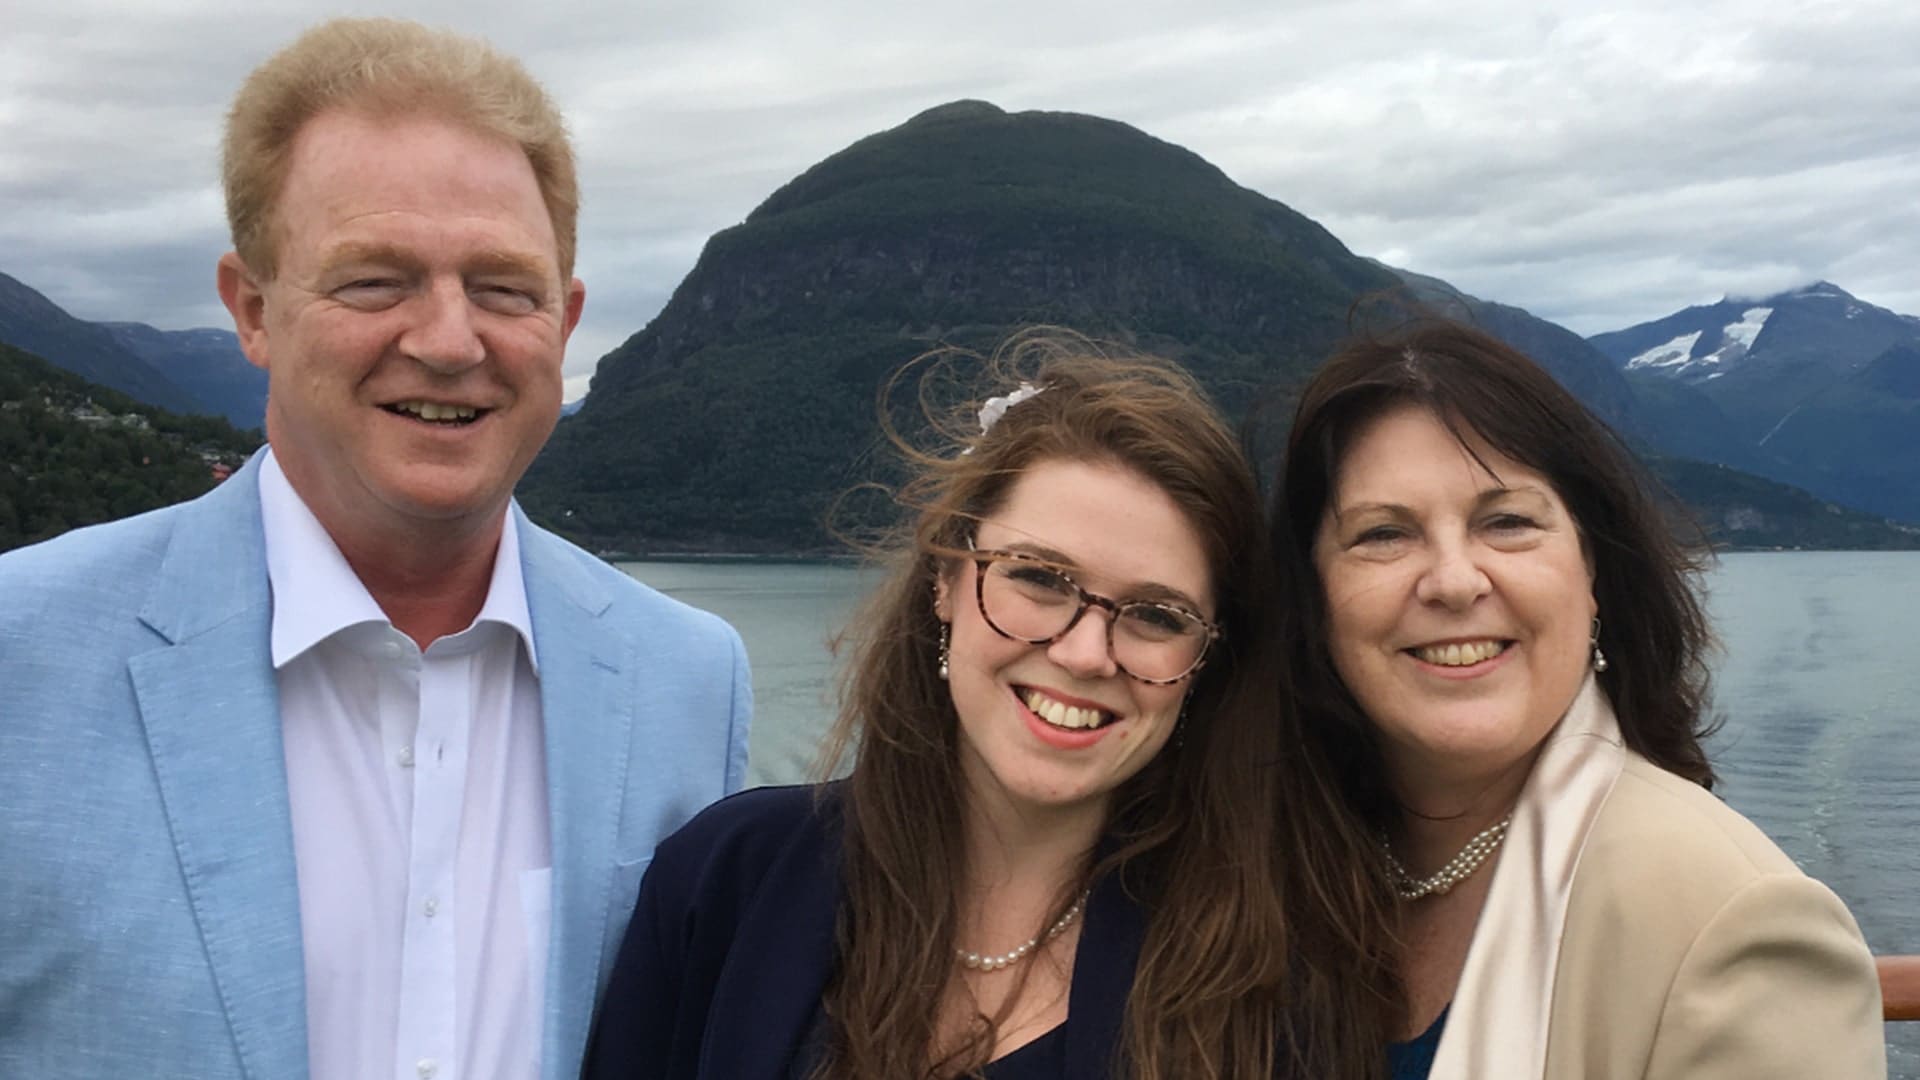 Dr Elizabeth McNaught and her parents Nick and Carol Pollard, of Family Mental Wealth, posing for a picture in front of a lake and large mountain.